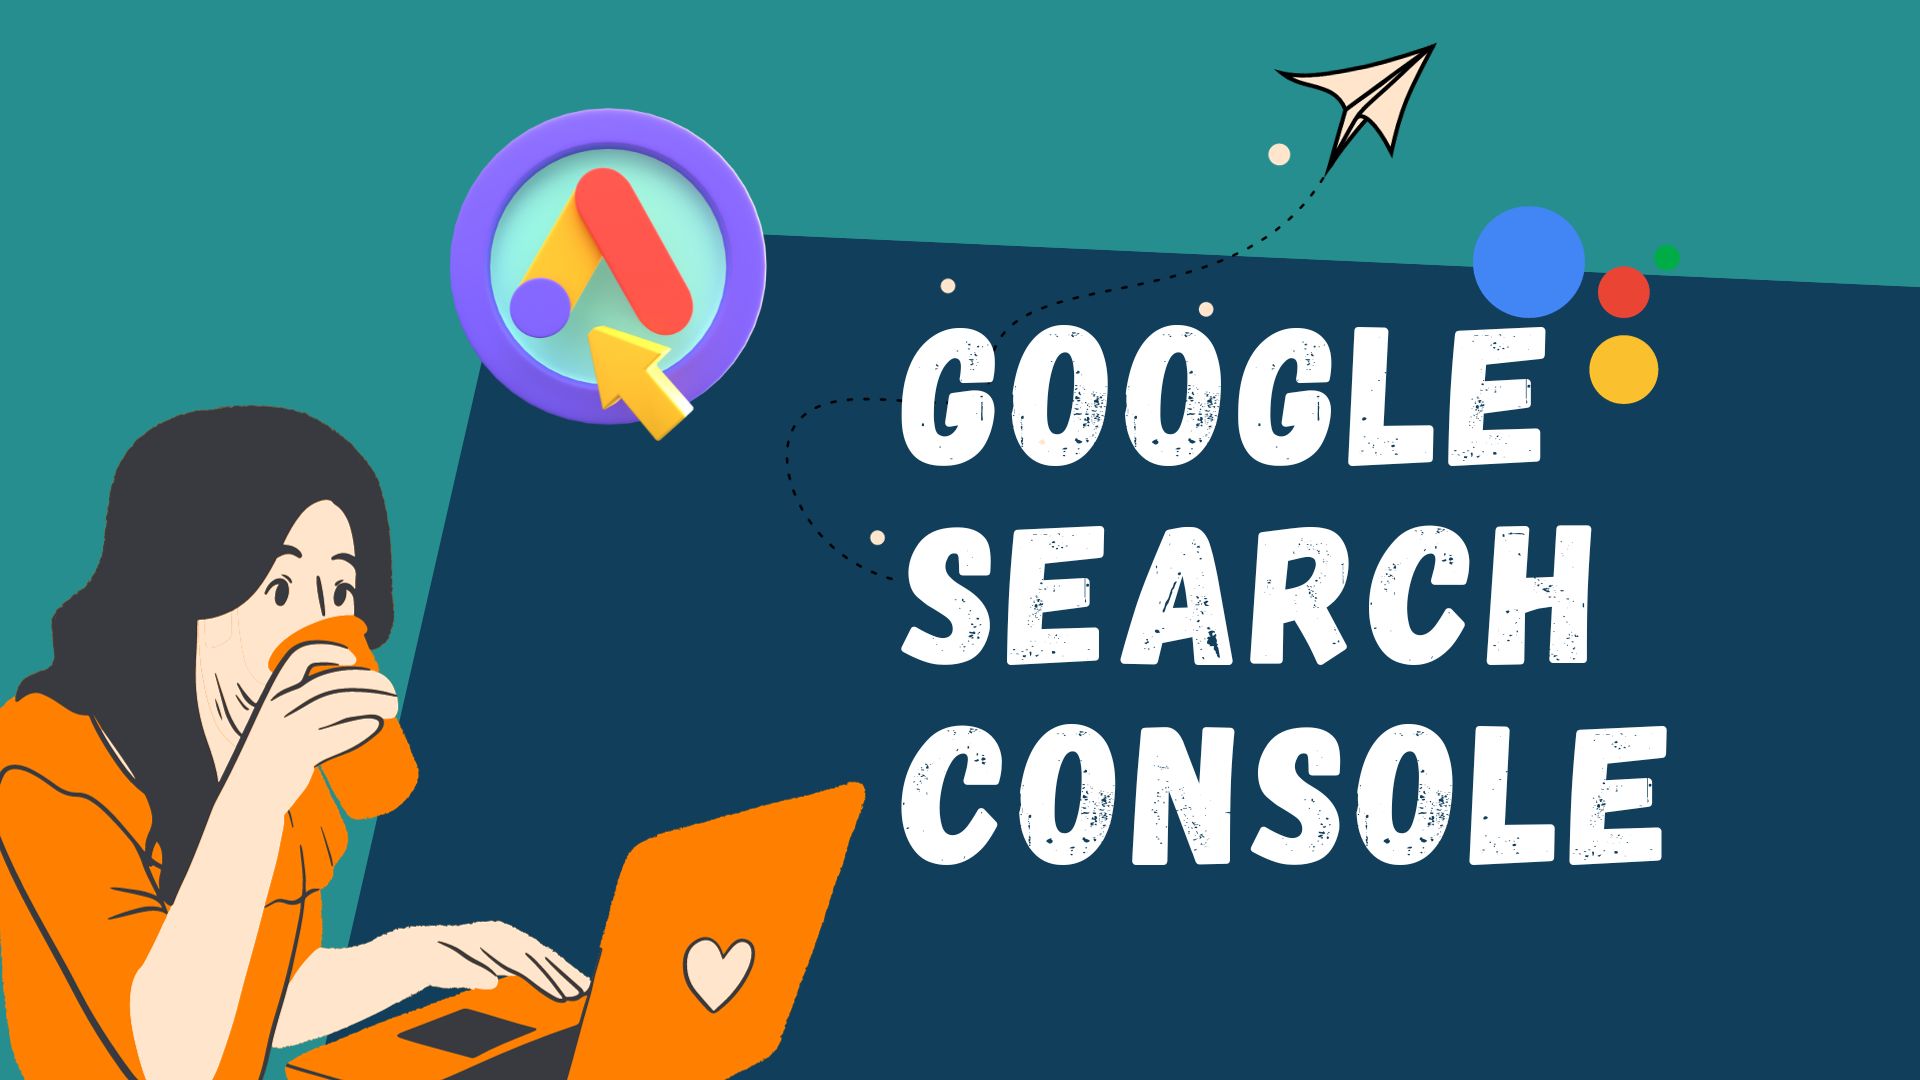 How important is the Google Search Console for SEO?